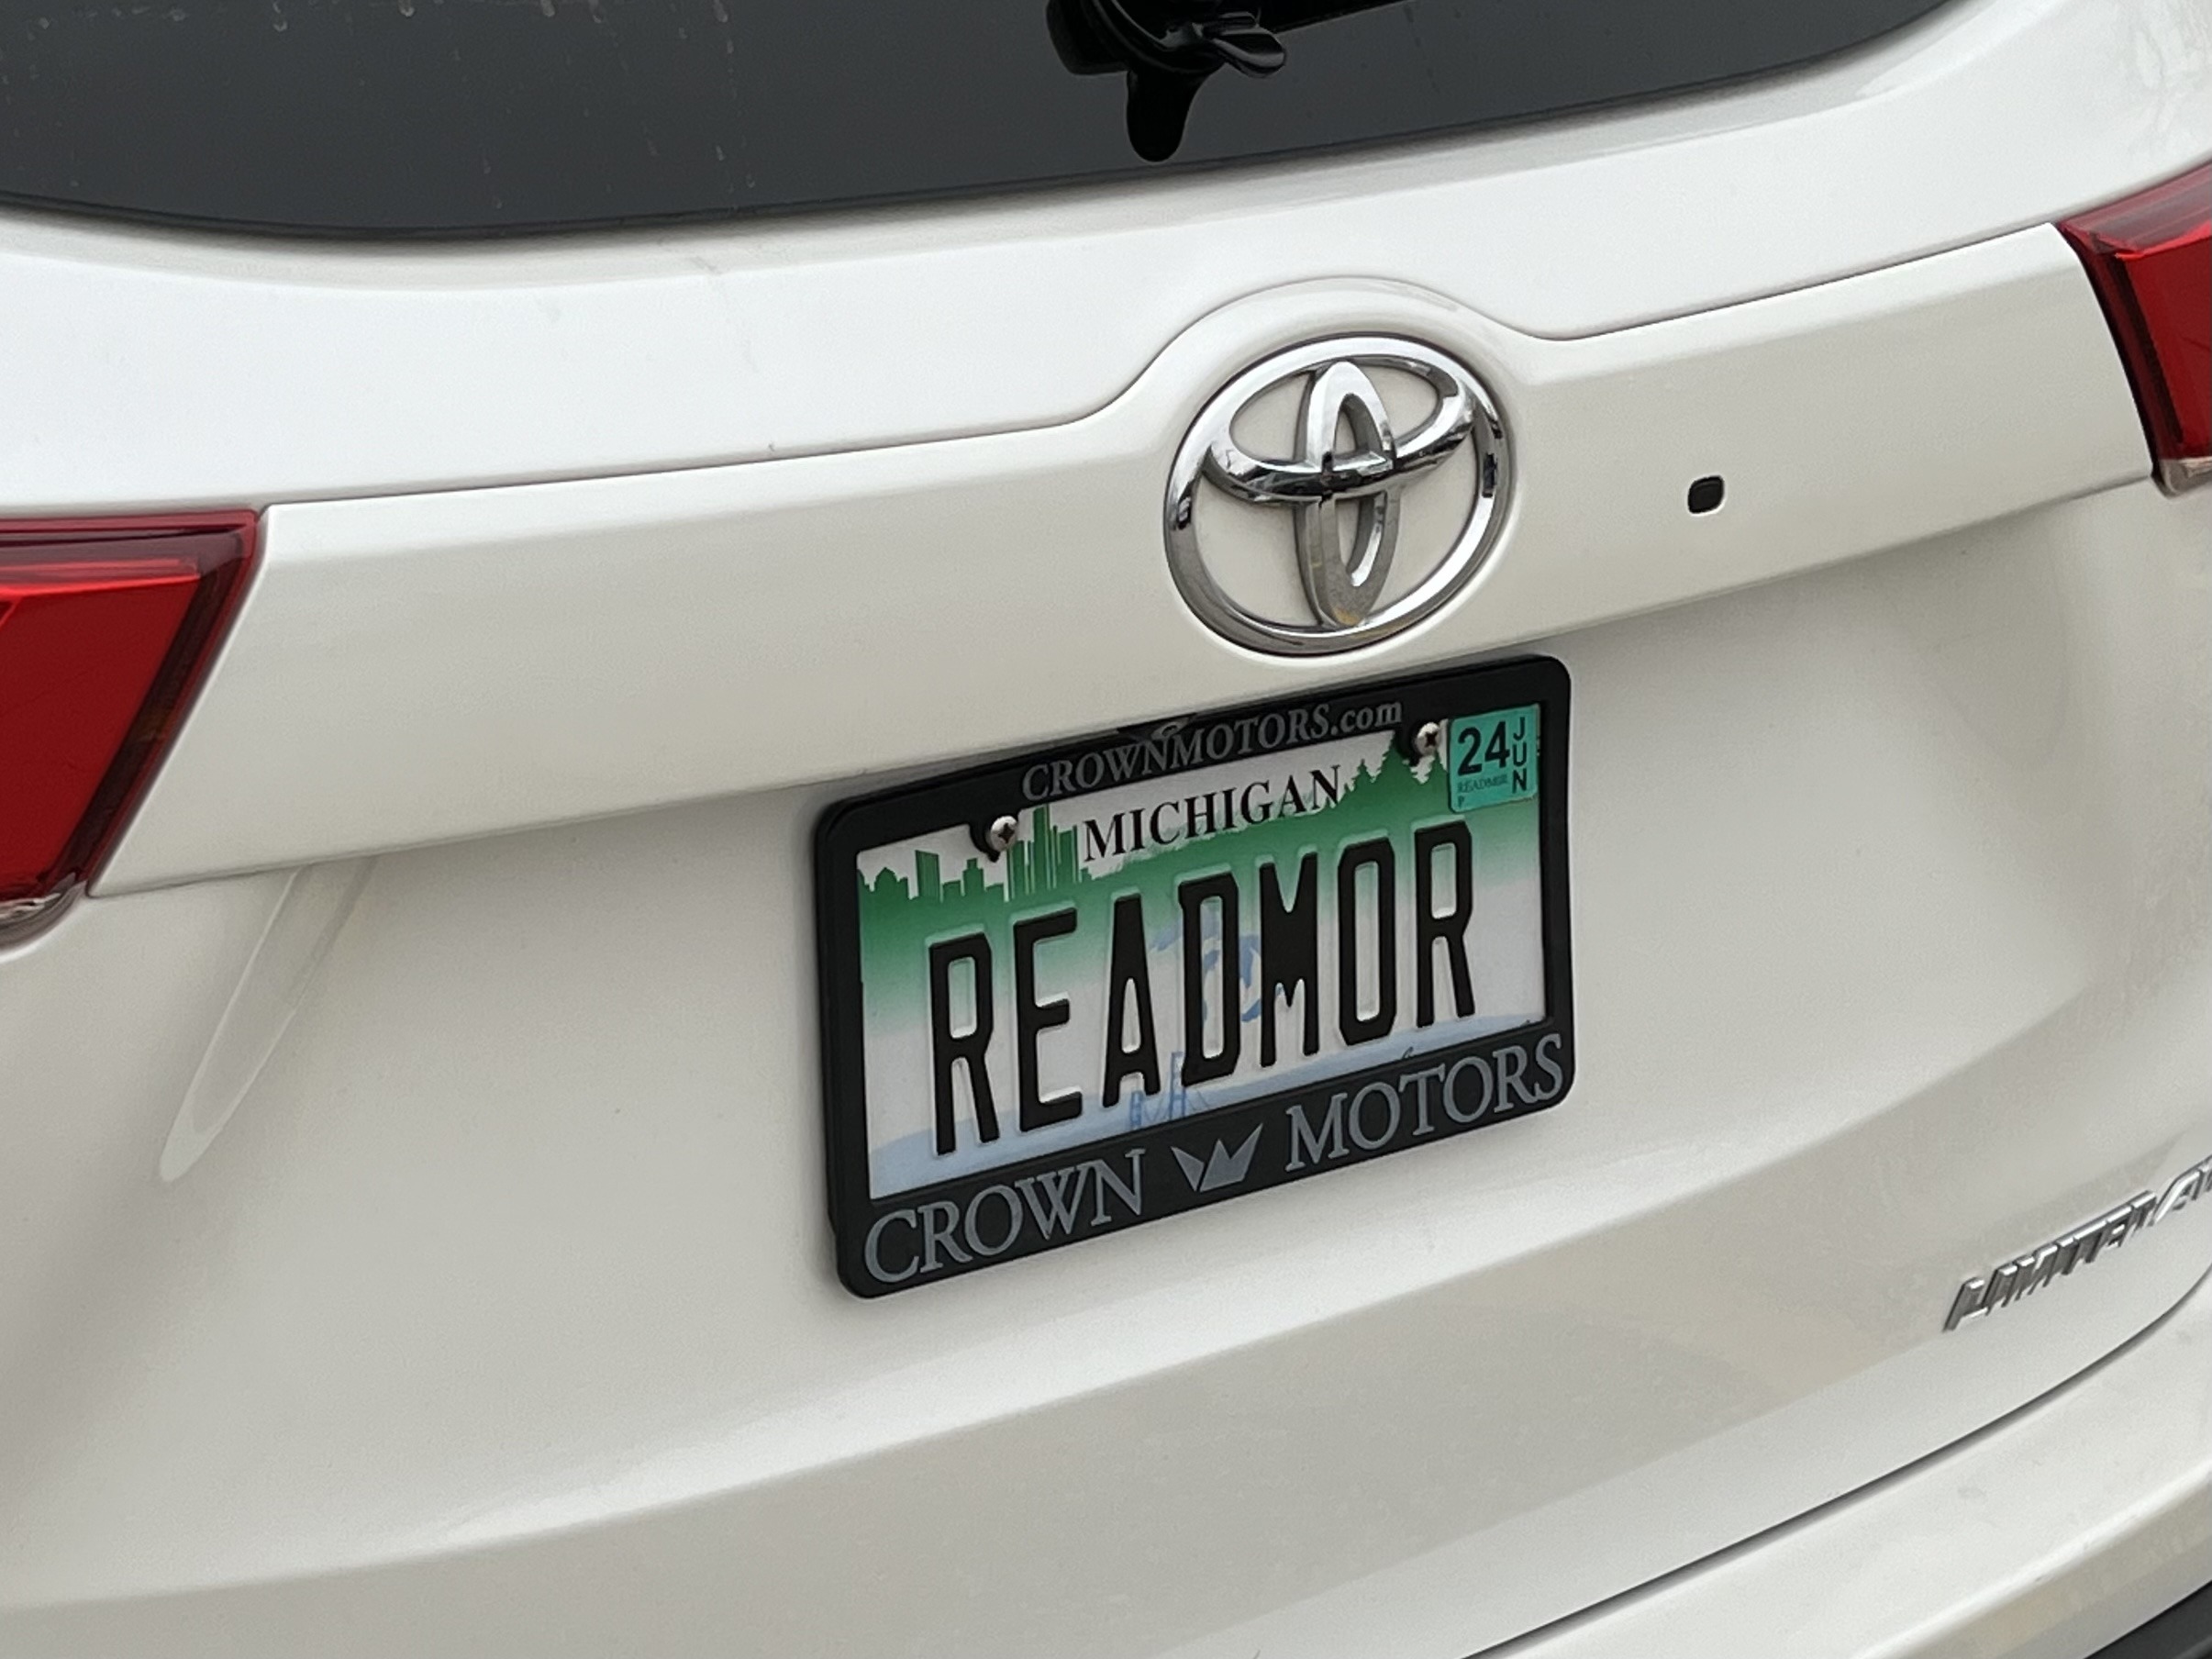 The Book-Related Vanity Plate of the Year